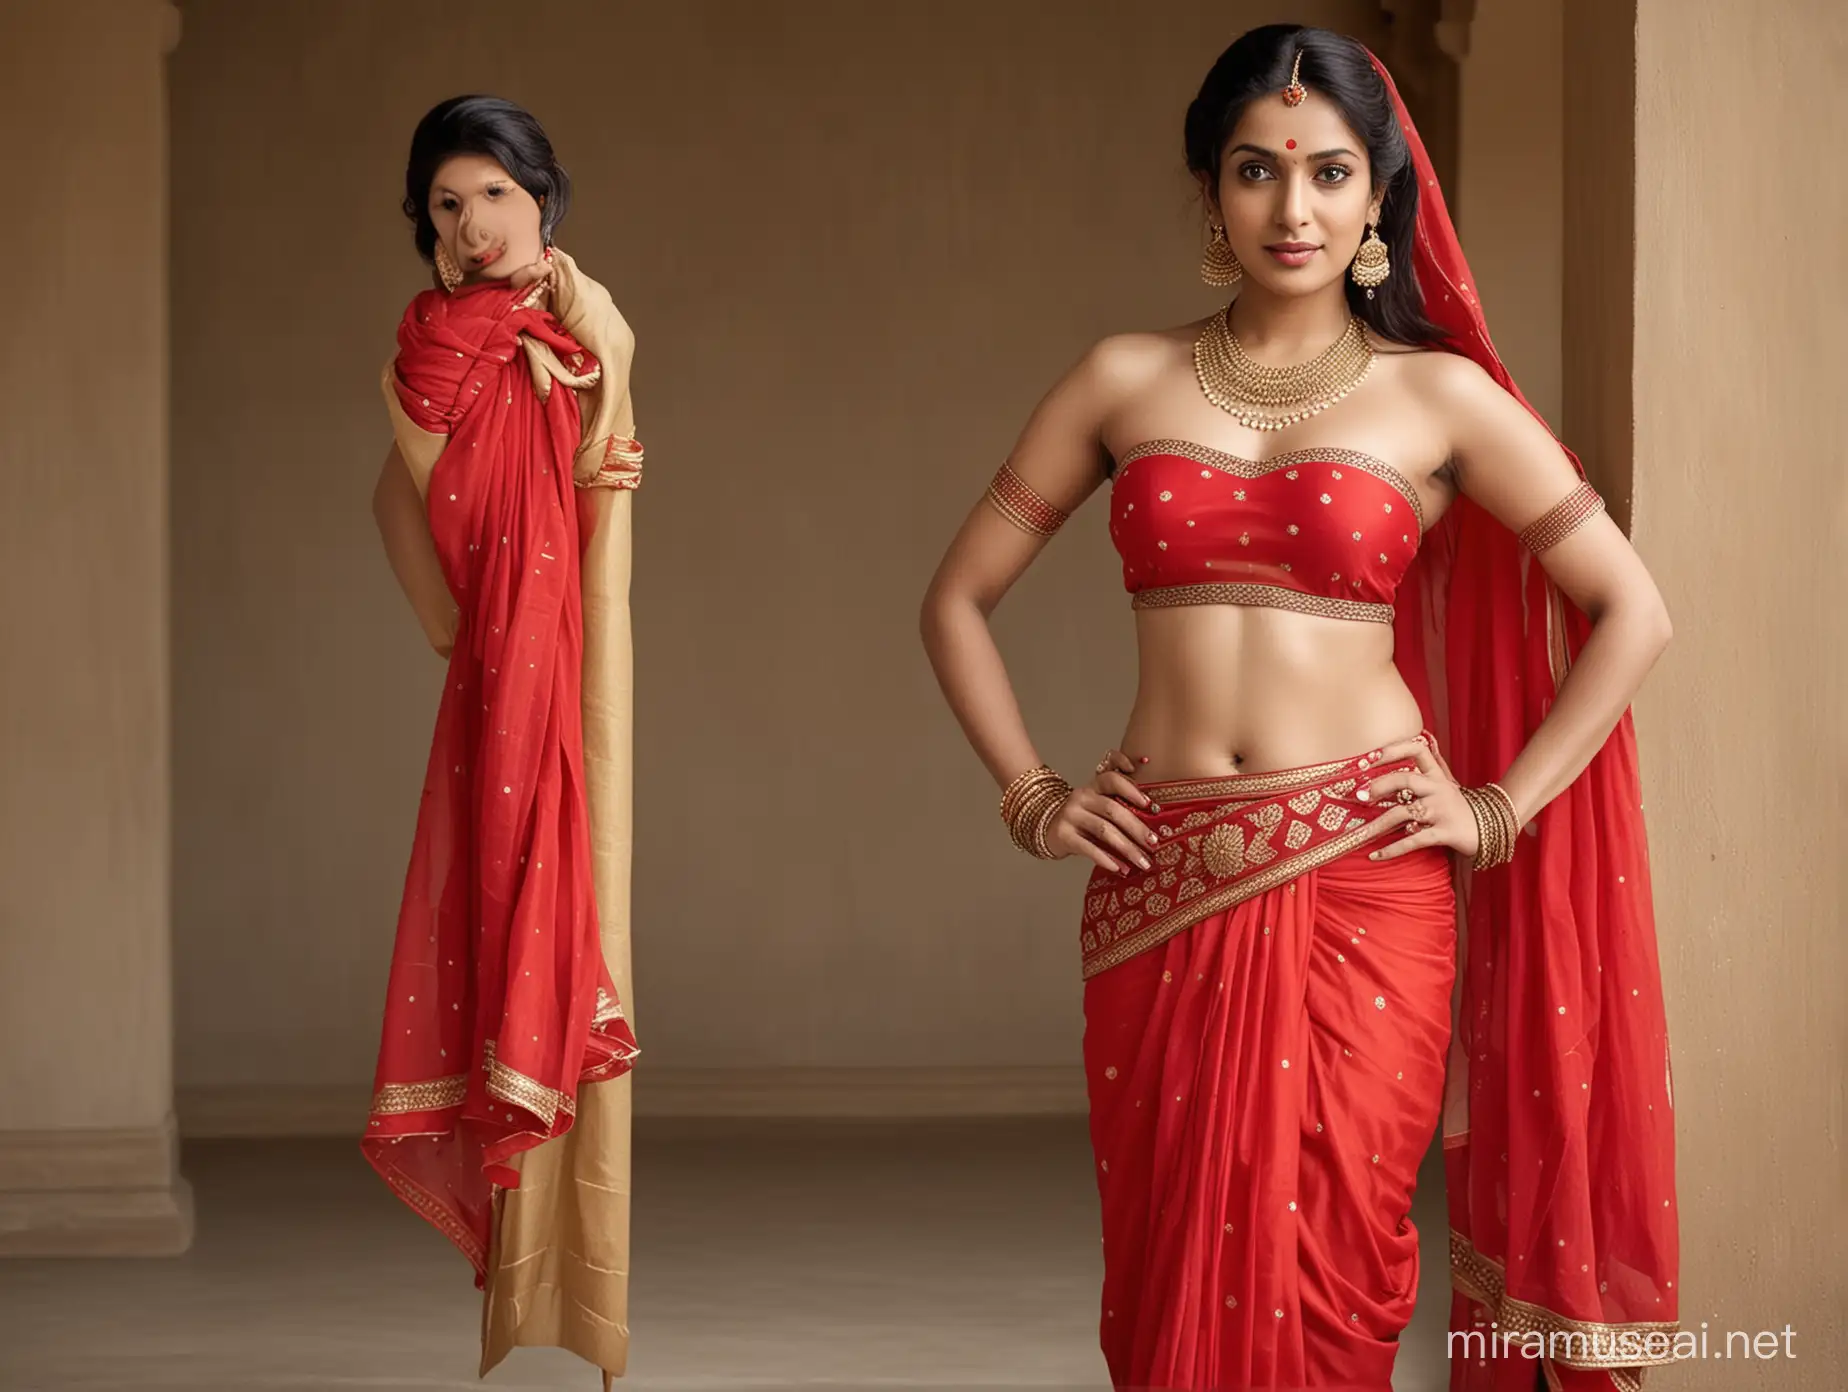 Elegant Indian Model in Traditional Red Bandeau Lingerie with Sheer Dhoti